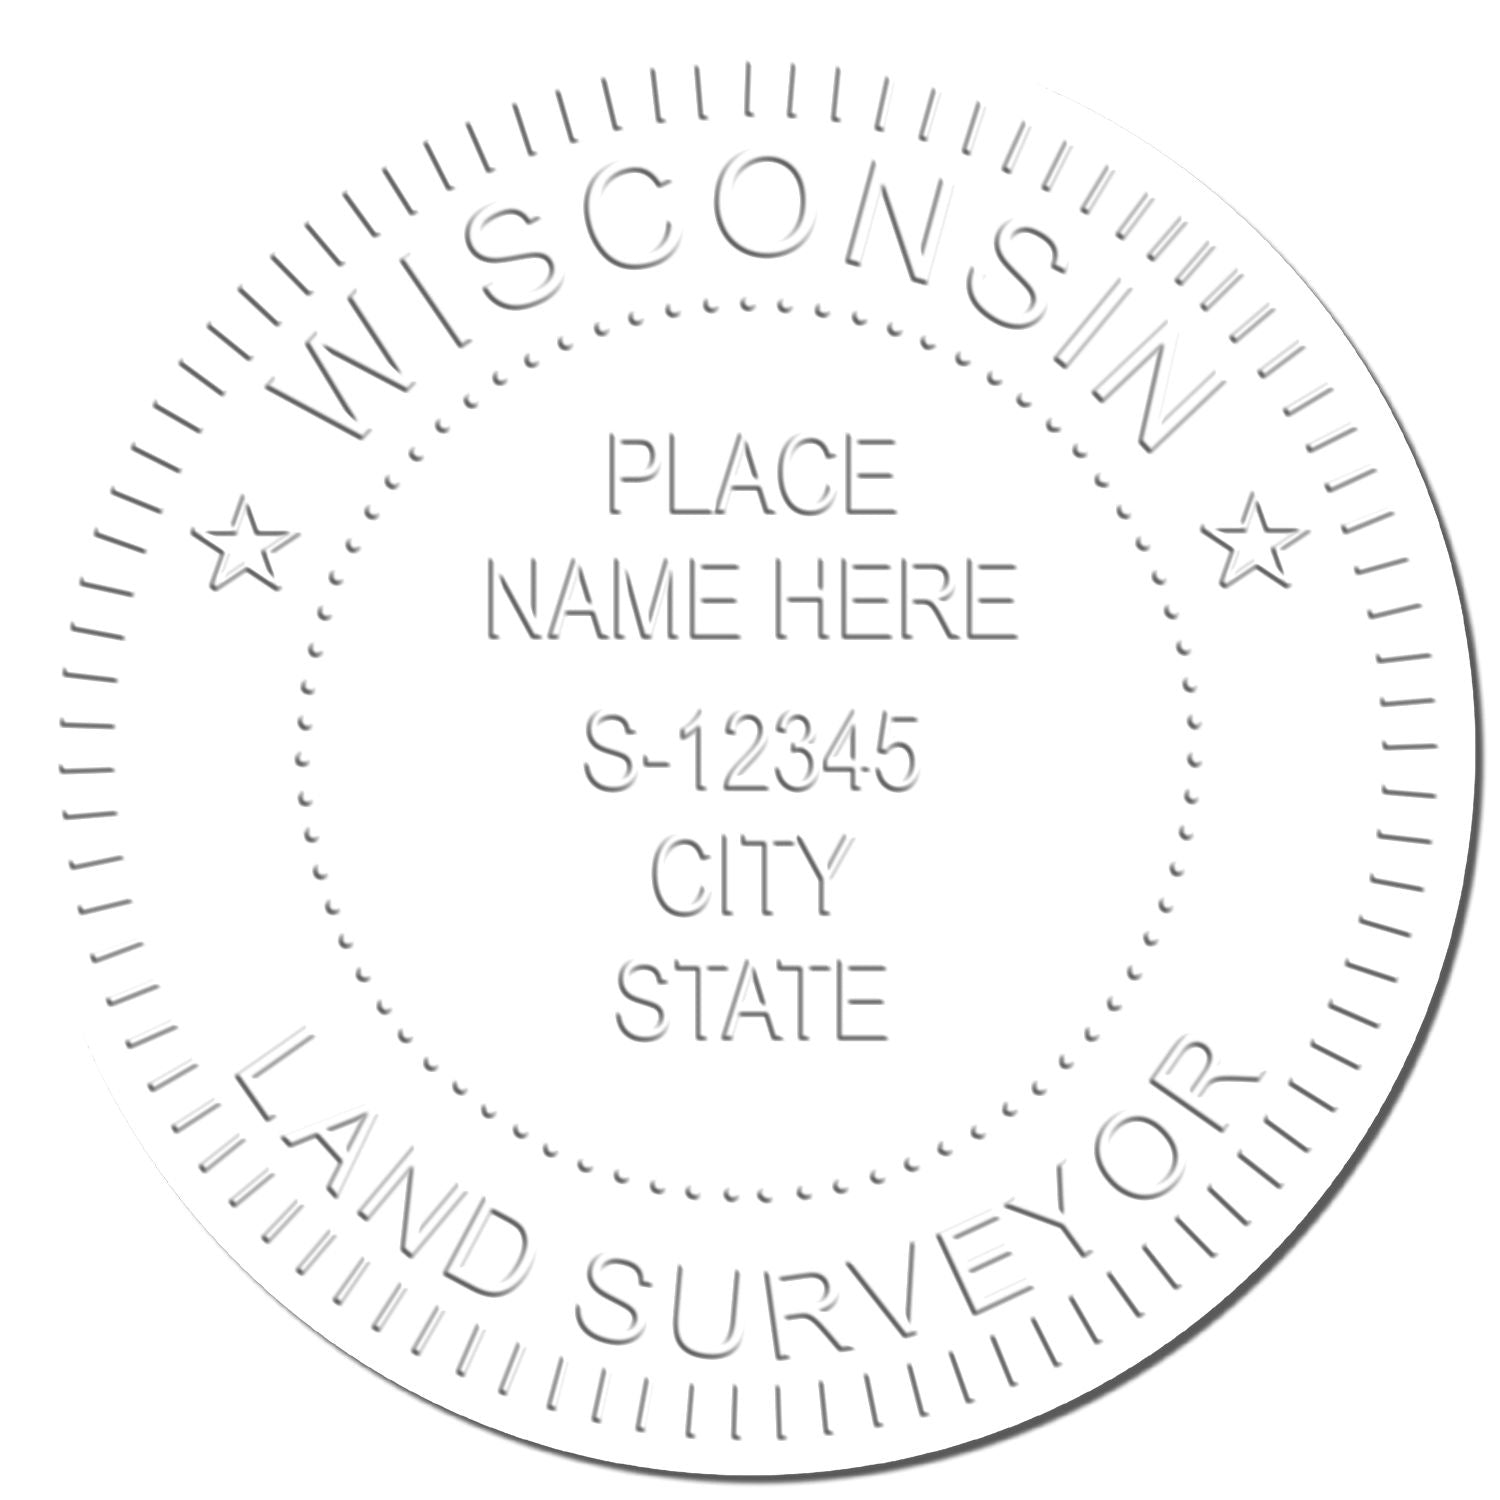 This paper is stamped with a sample imprint of the Long Reach Wisconsin Land Surveyor Seal, signifying its quality and reliability.